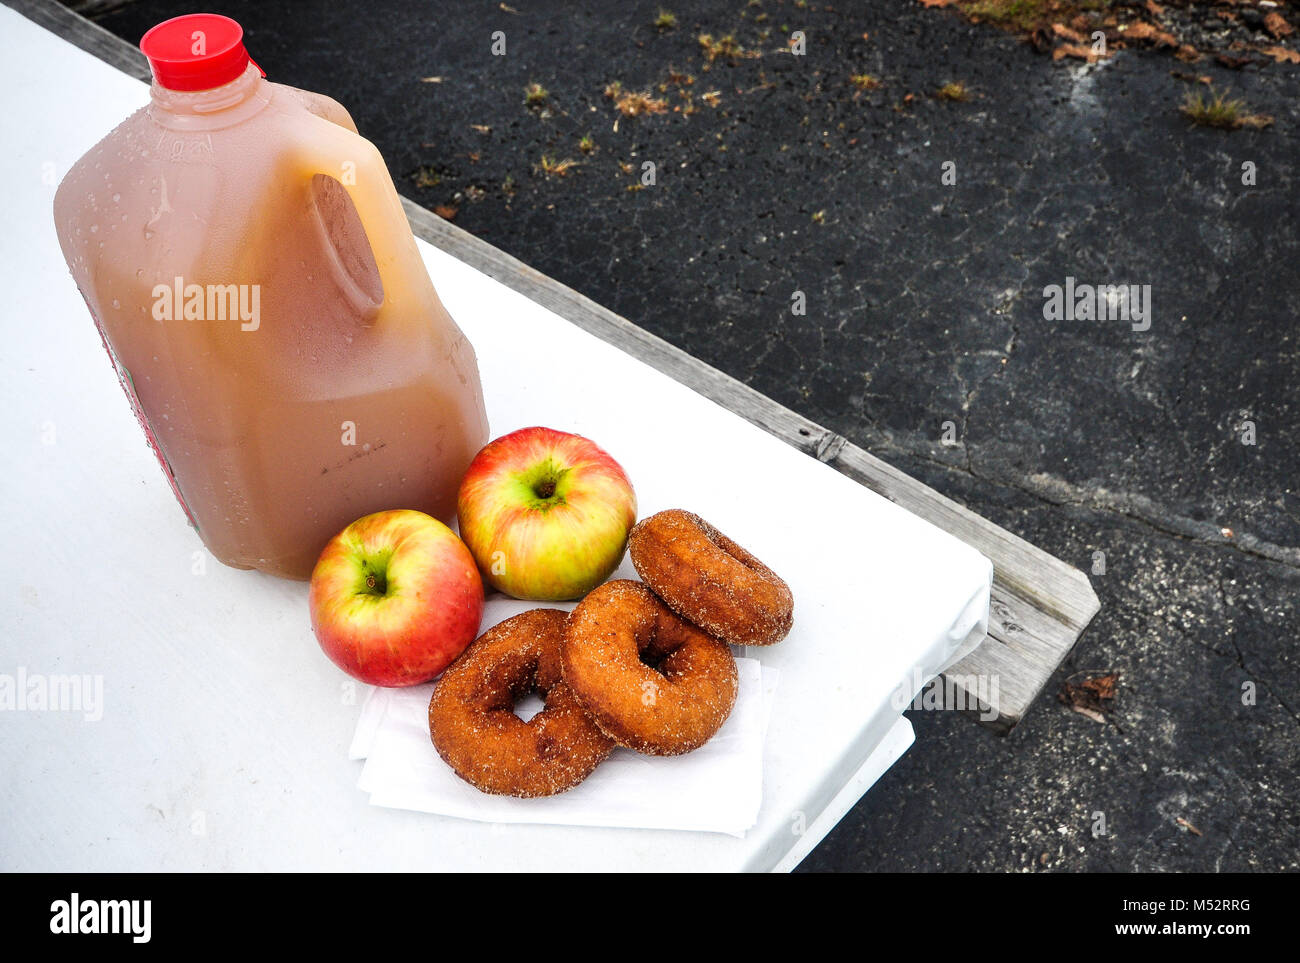 Cold pressed apple cider in a plastic gallon jug dotted by moisture drops of condensation next to two Gala apples and three cider donuts. Stock Photo